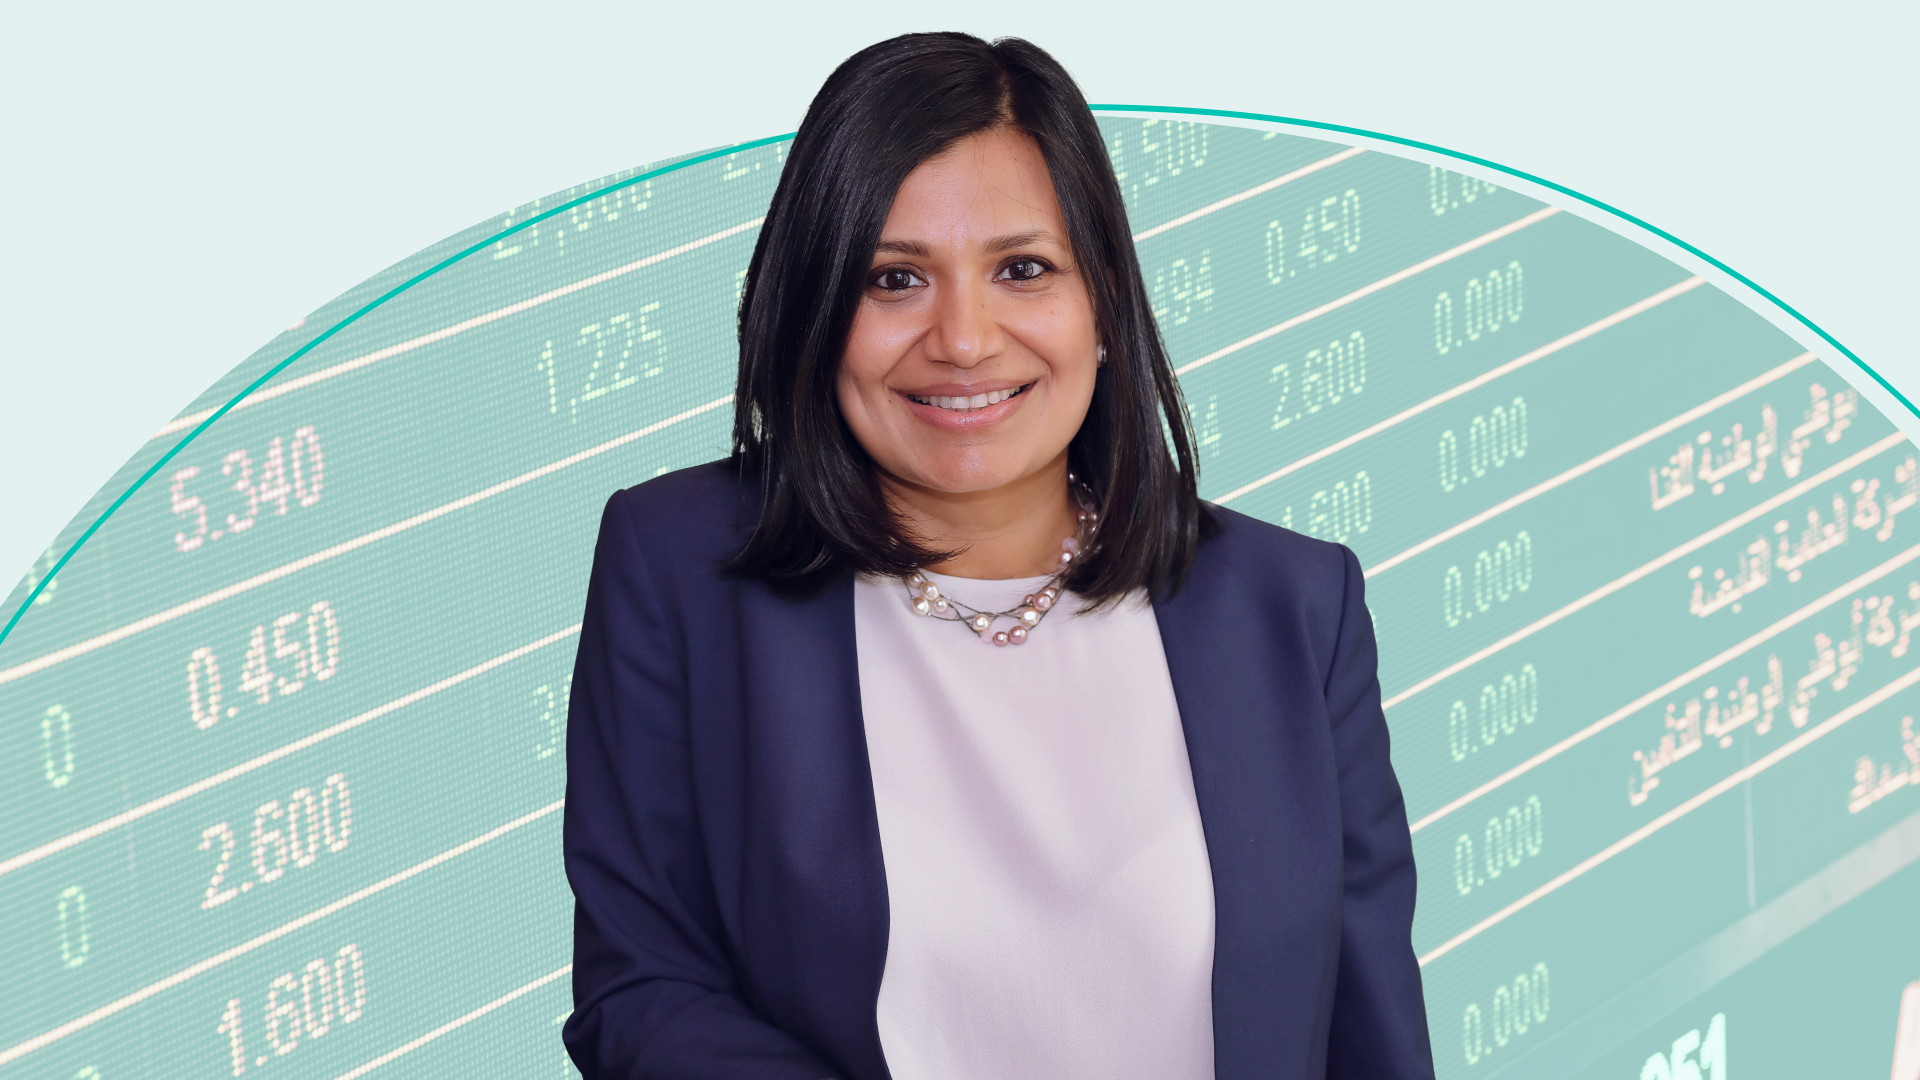 headshot of the Head of iShares® Investment Strategy, Americas at Blackrock Gargi Pal Chaudhuri against a Skimm-treated background with stock ticker symbols